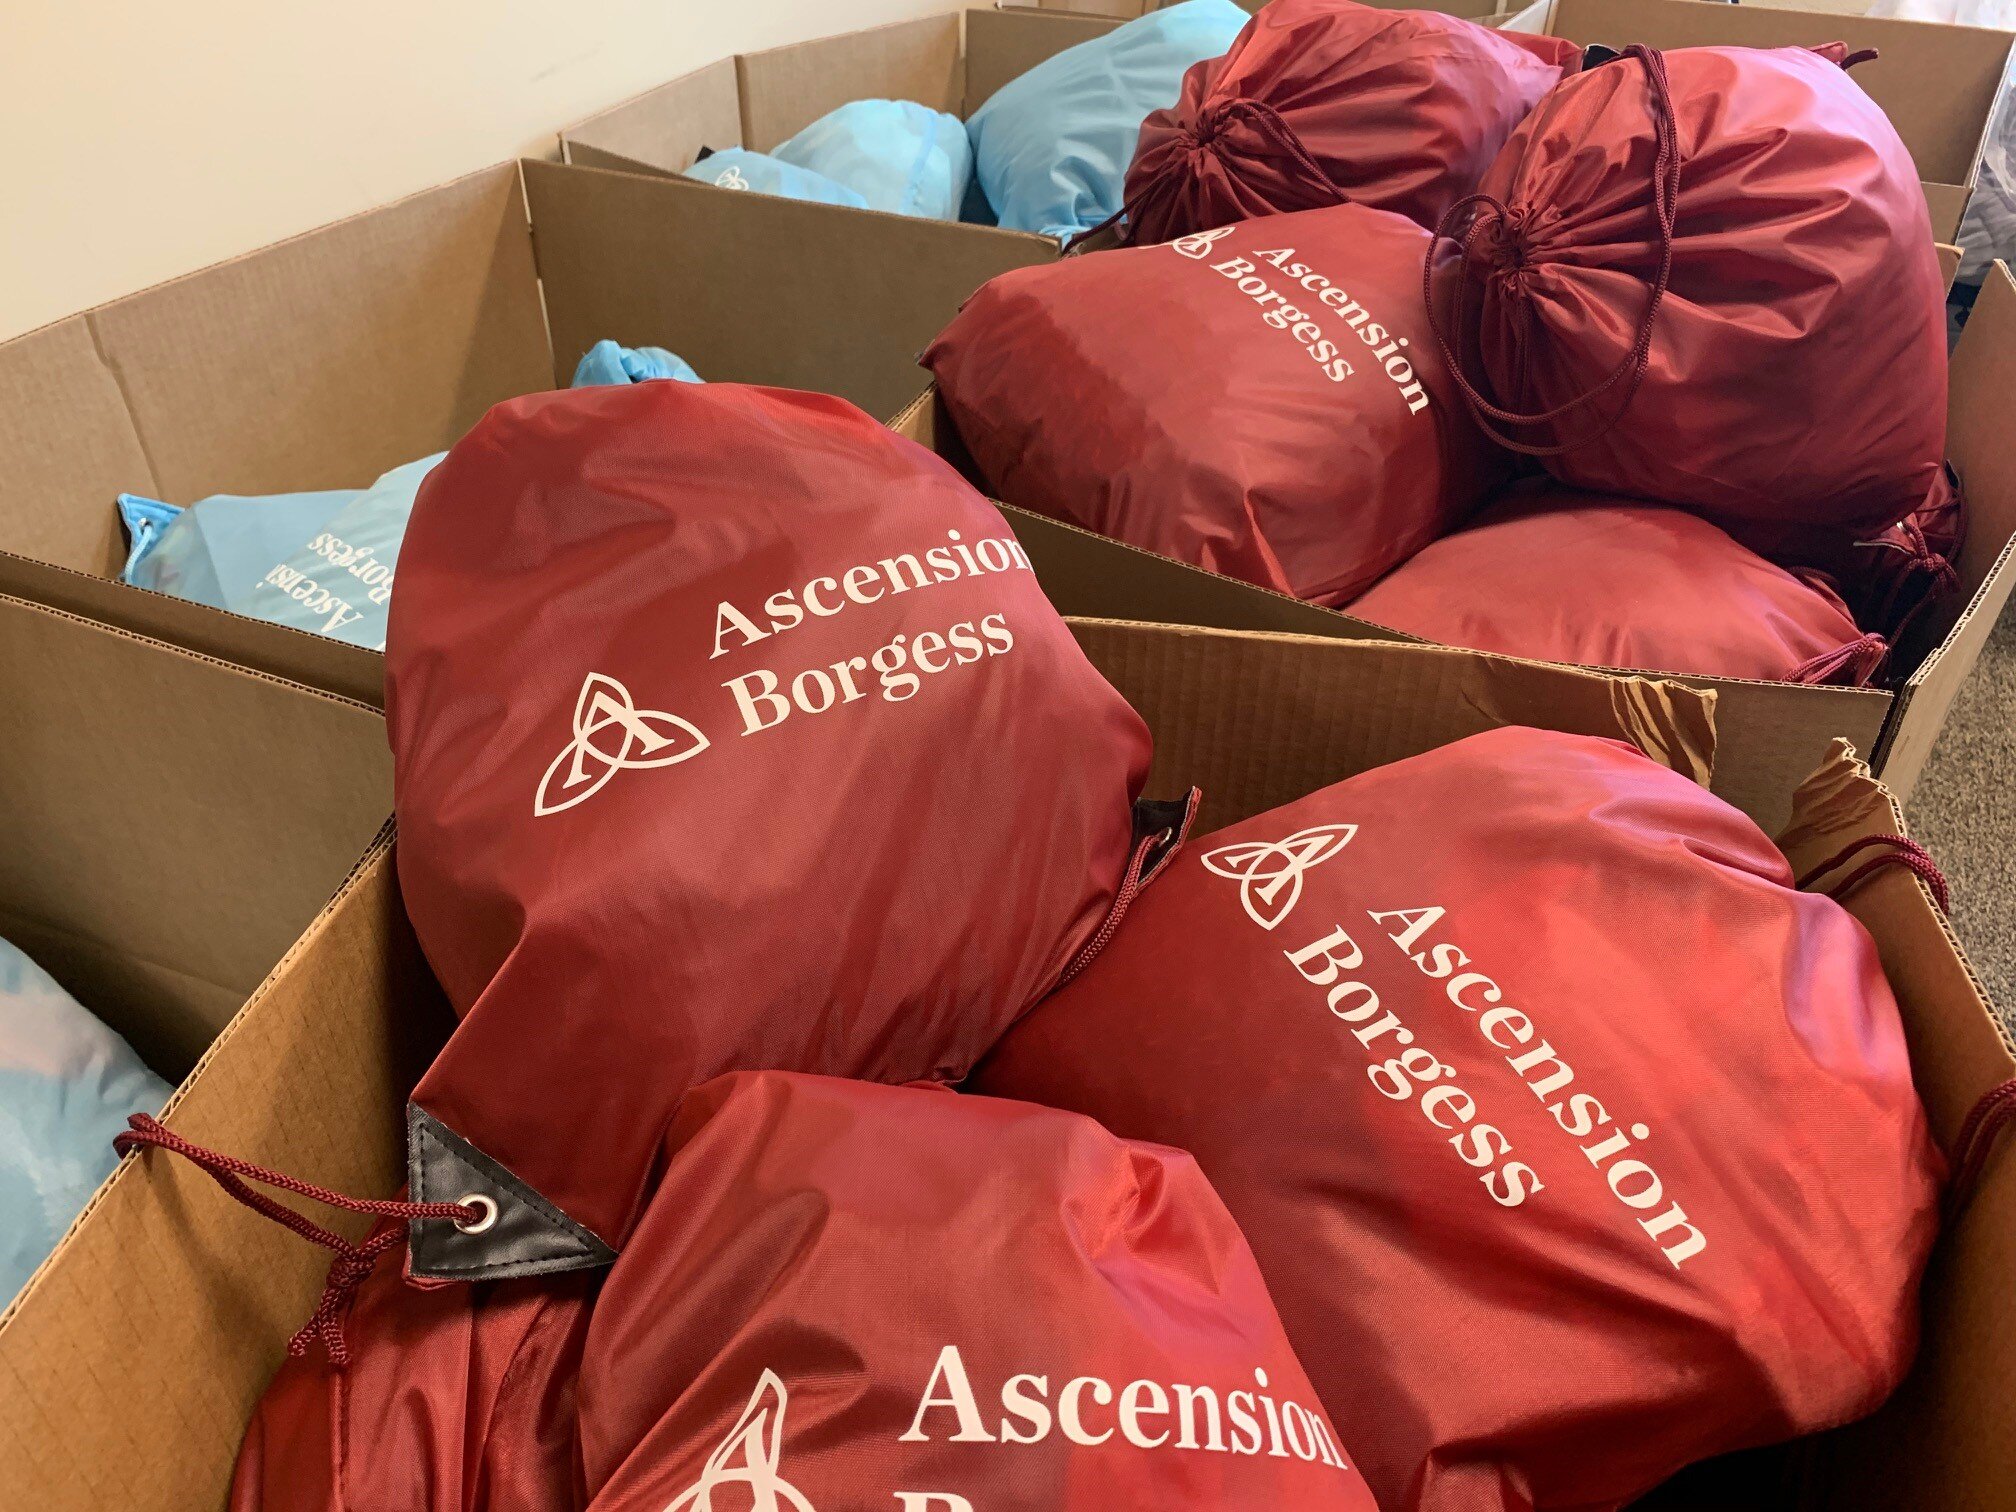  Thanks to our Christmas Day sponsor, Ascension Borgess, each of our members will receive their gifts in a reusable drawstring bag! 